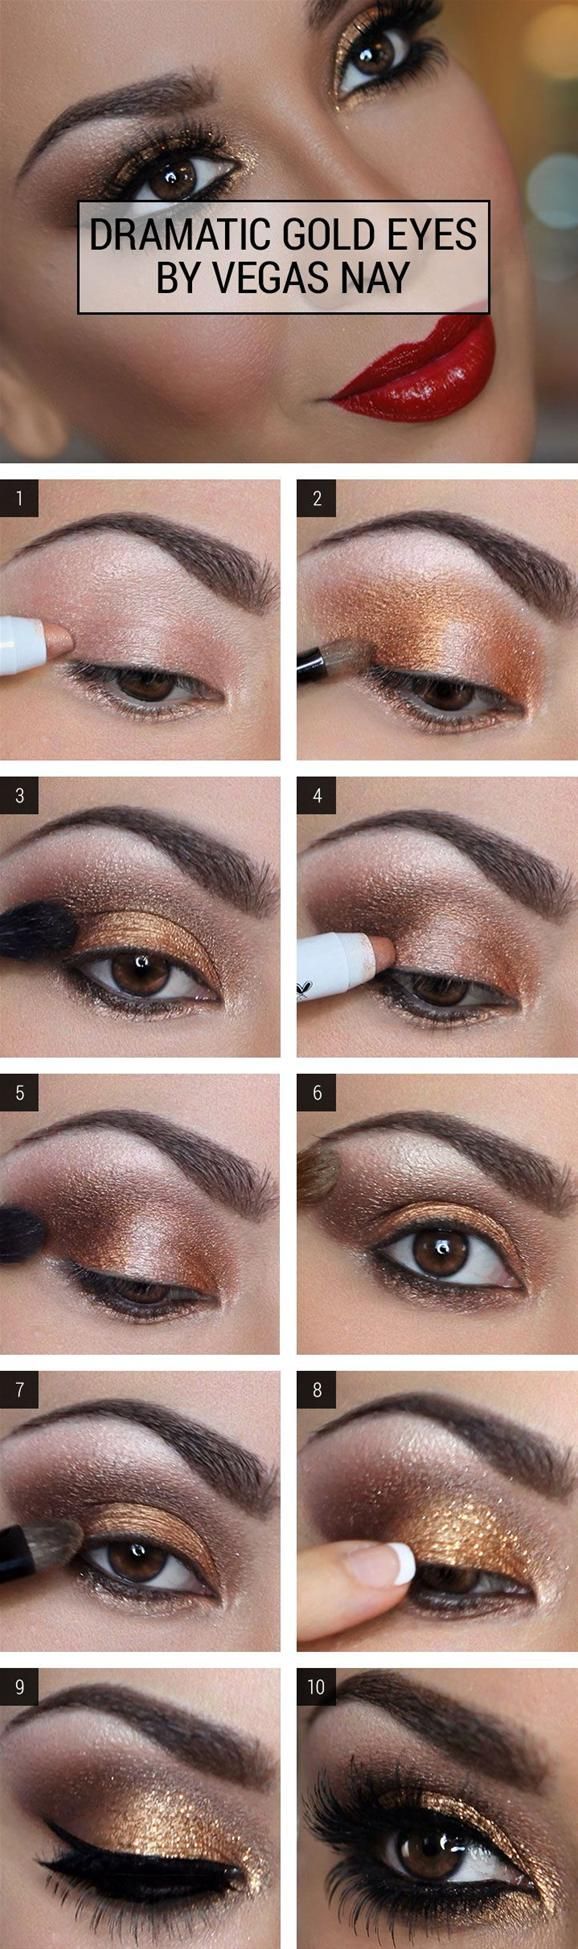 27 pretty makeup tutorials for brown eyes | styles weekly